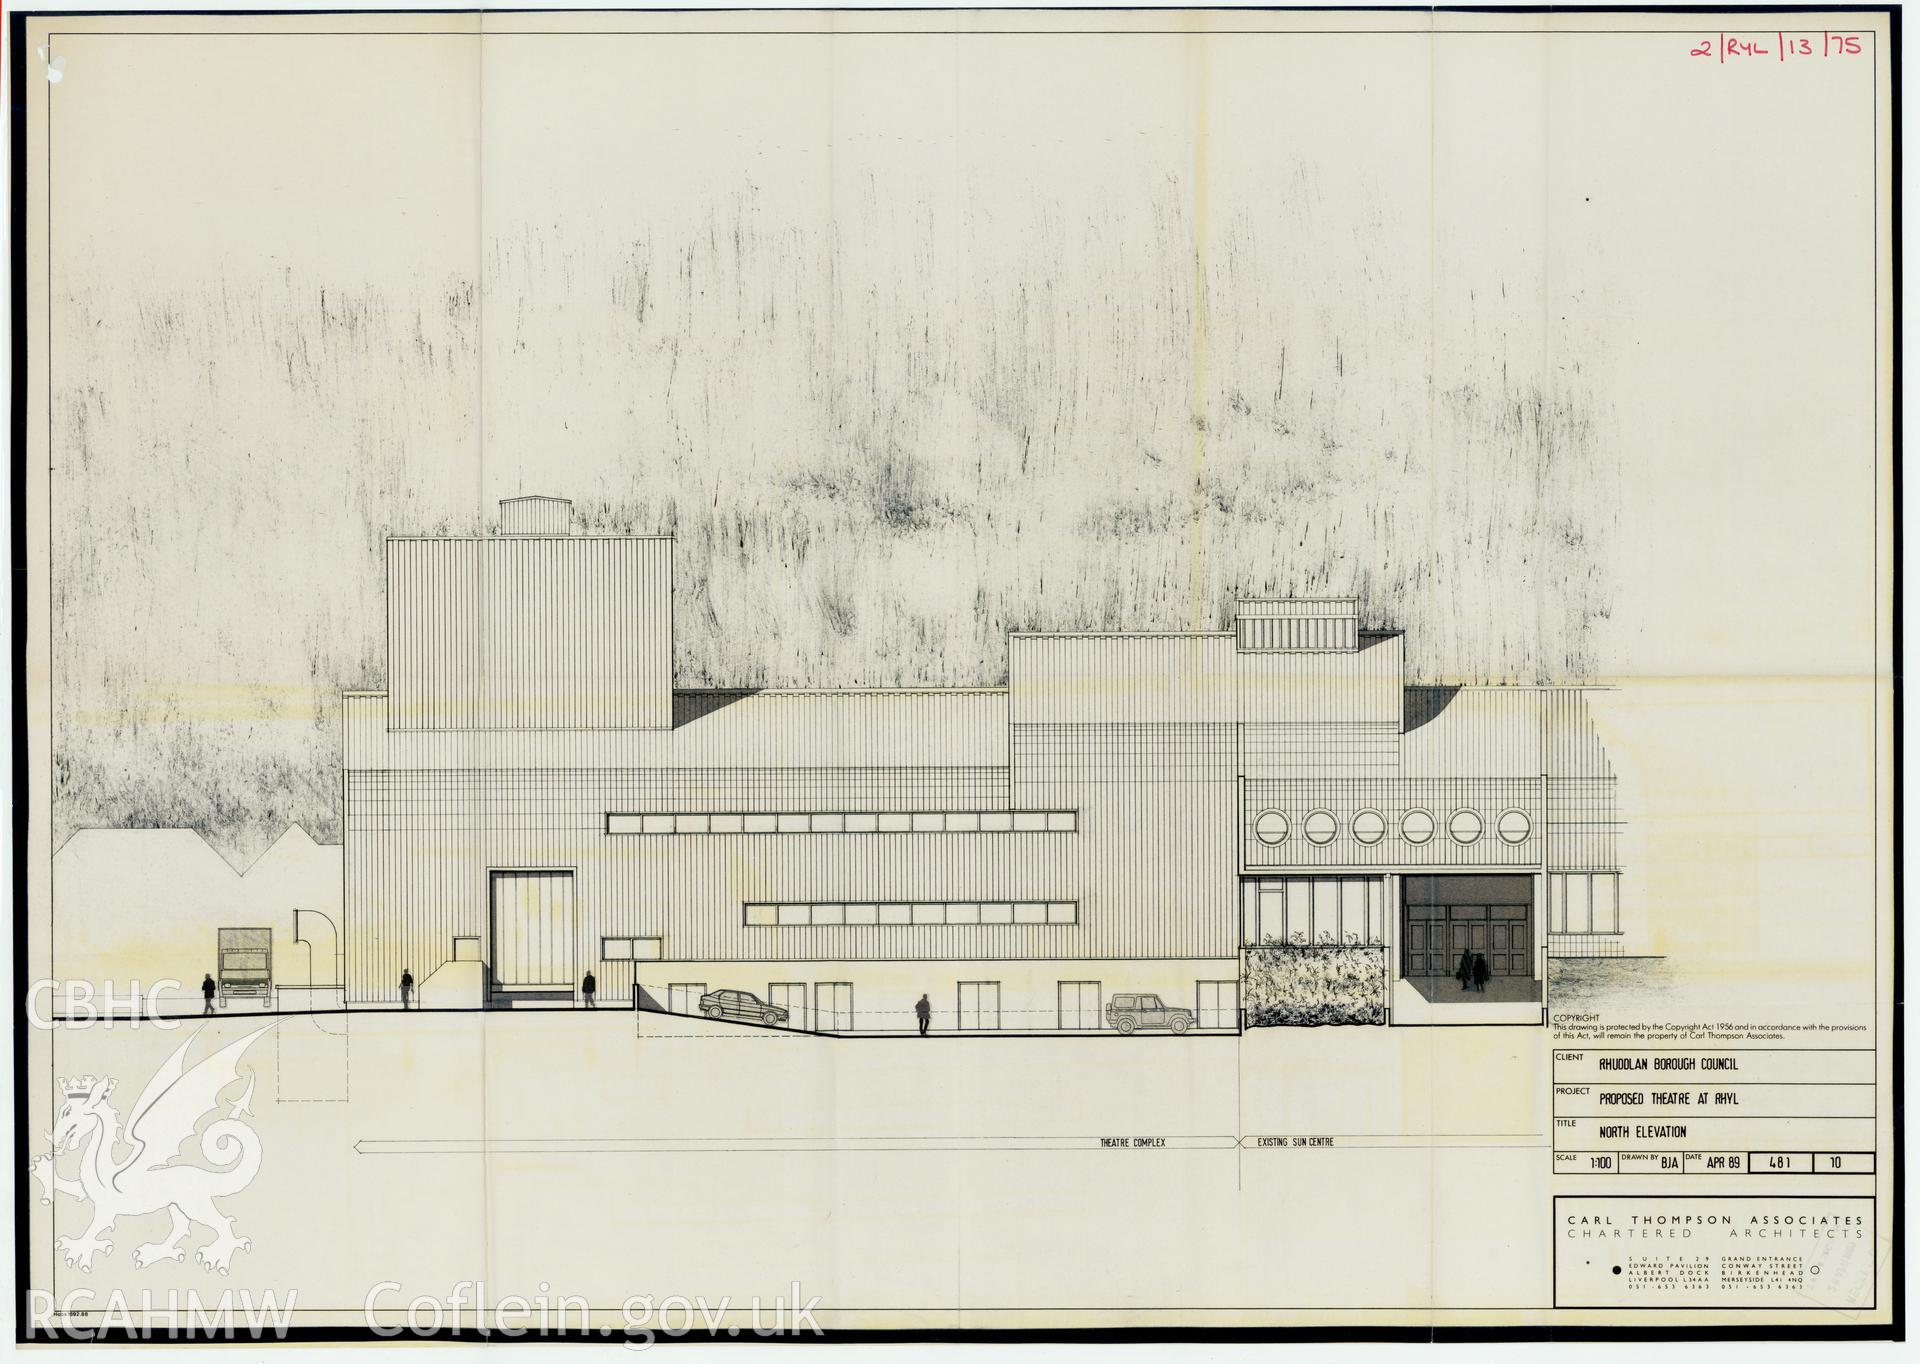 Digital copy of a measured drawing showing the north elevation of the 1989 proposed Theatre, Rhuddlan, produced by Carl Thompson Associates. Loaned for copying by Denbighshire County Council.